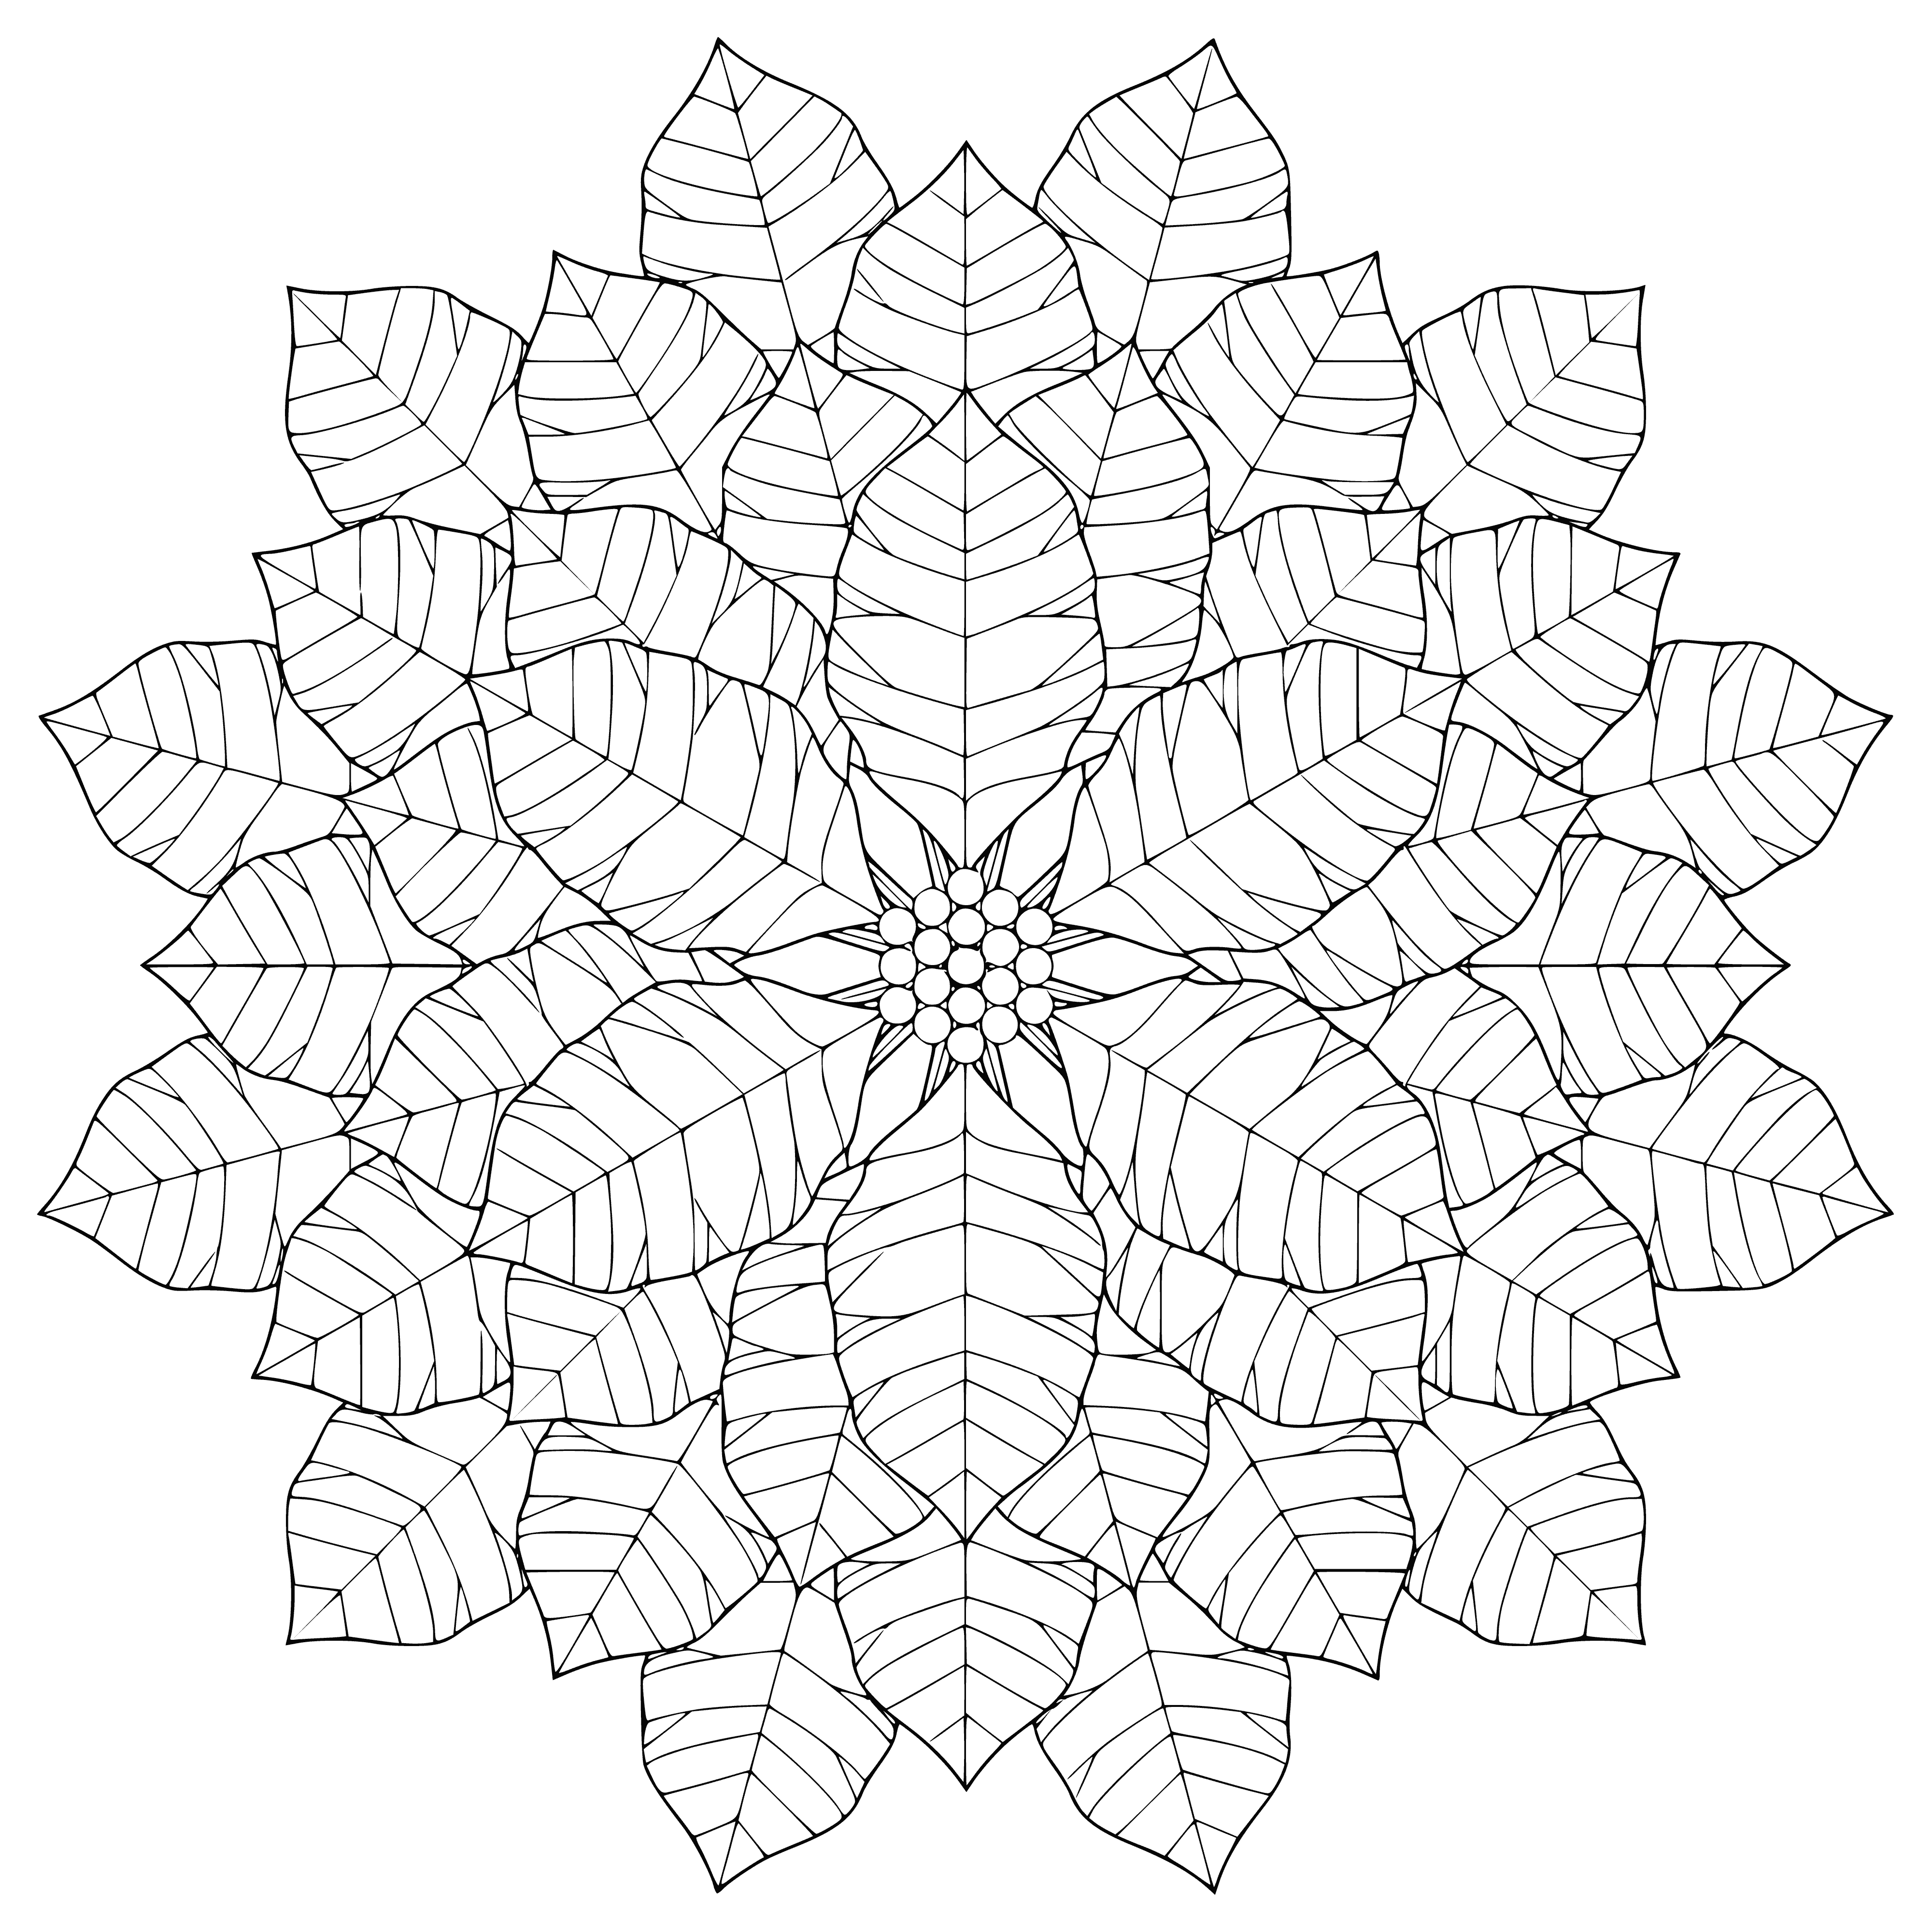 coloring page: Beautiful snowflake resting on a black background w/ 6 irregular, curved arms; smooth, blemish-free surface.